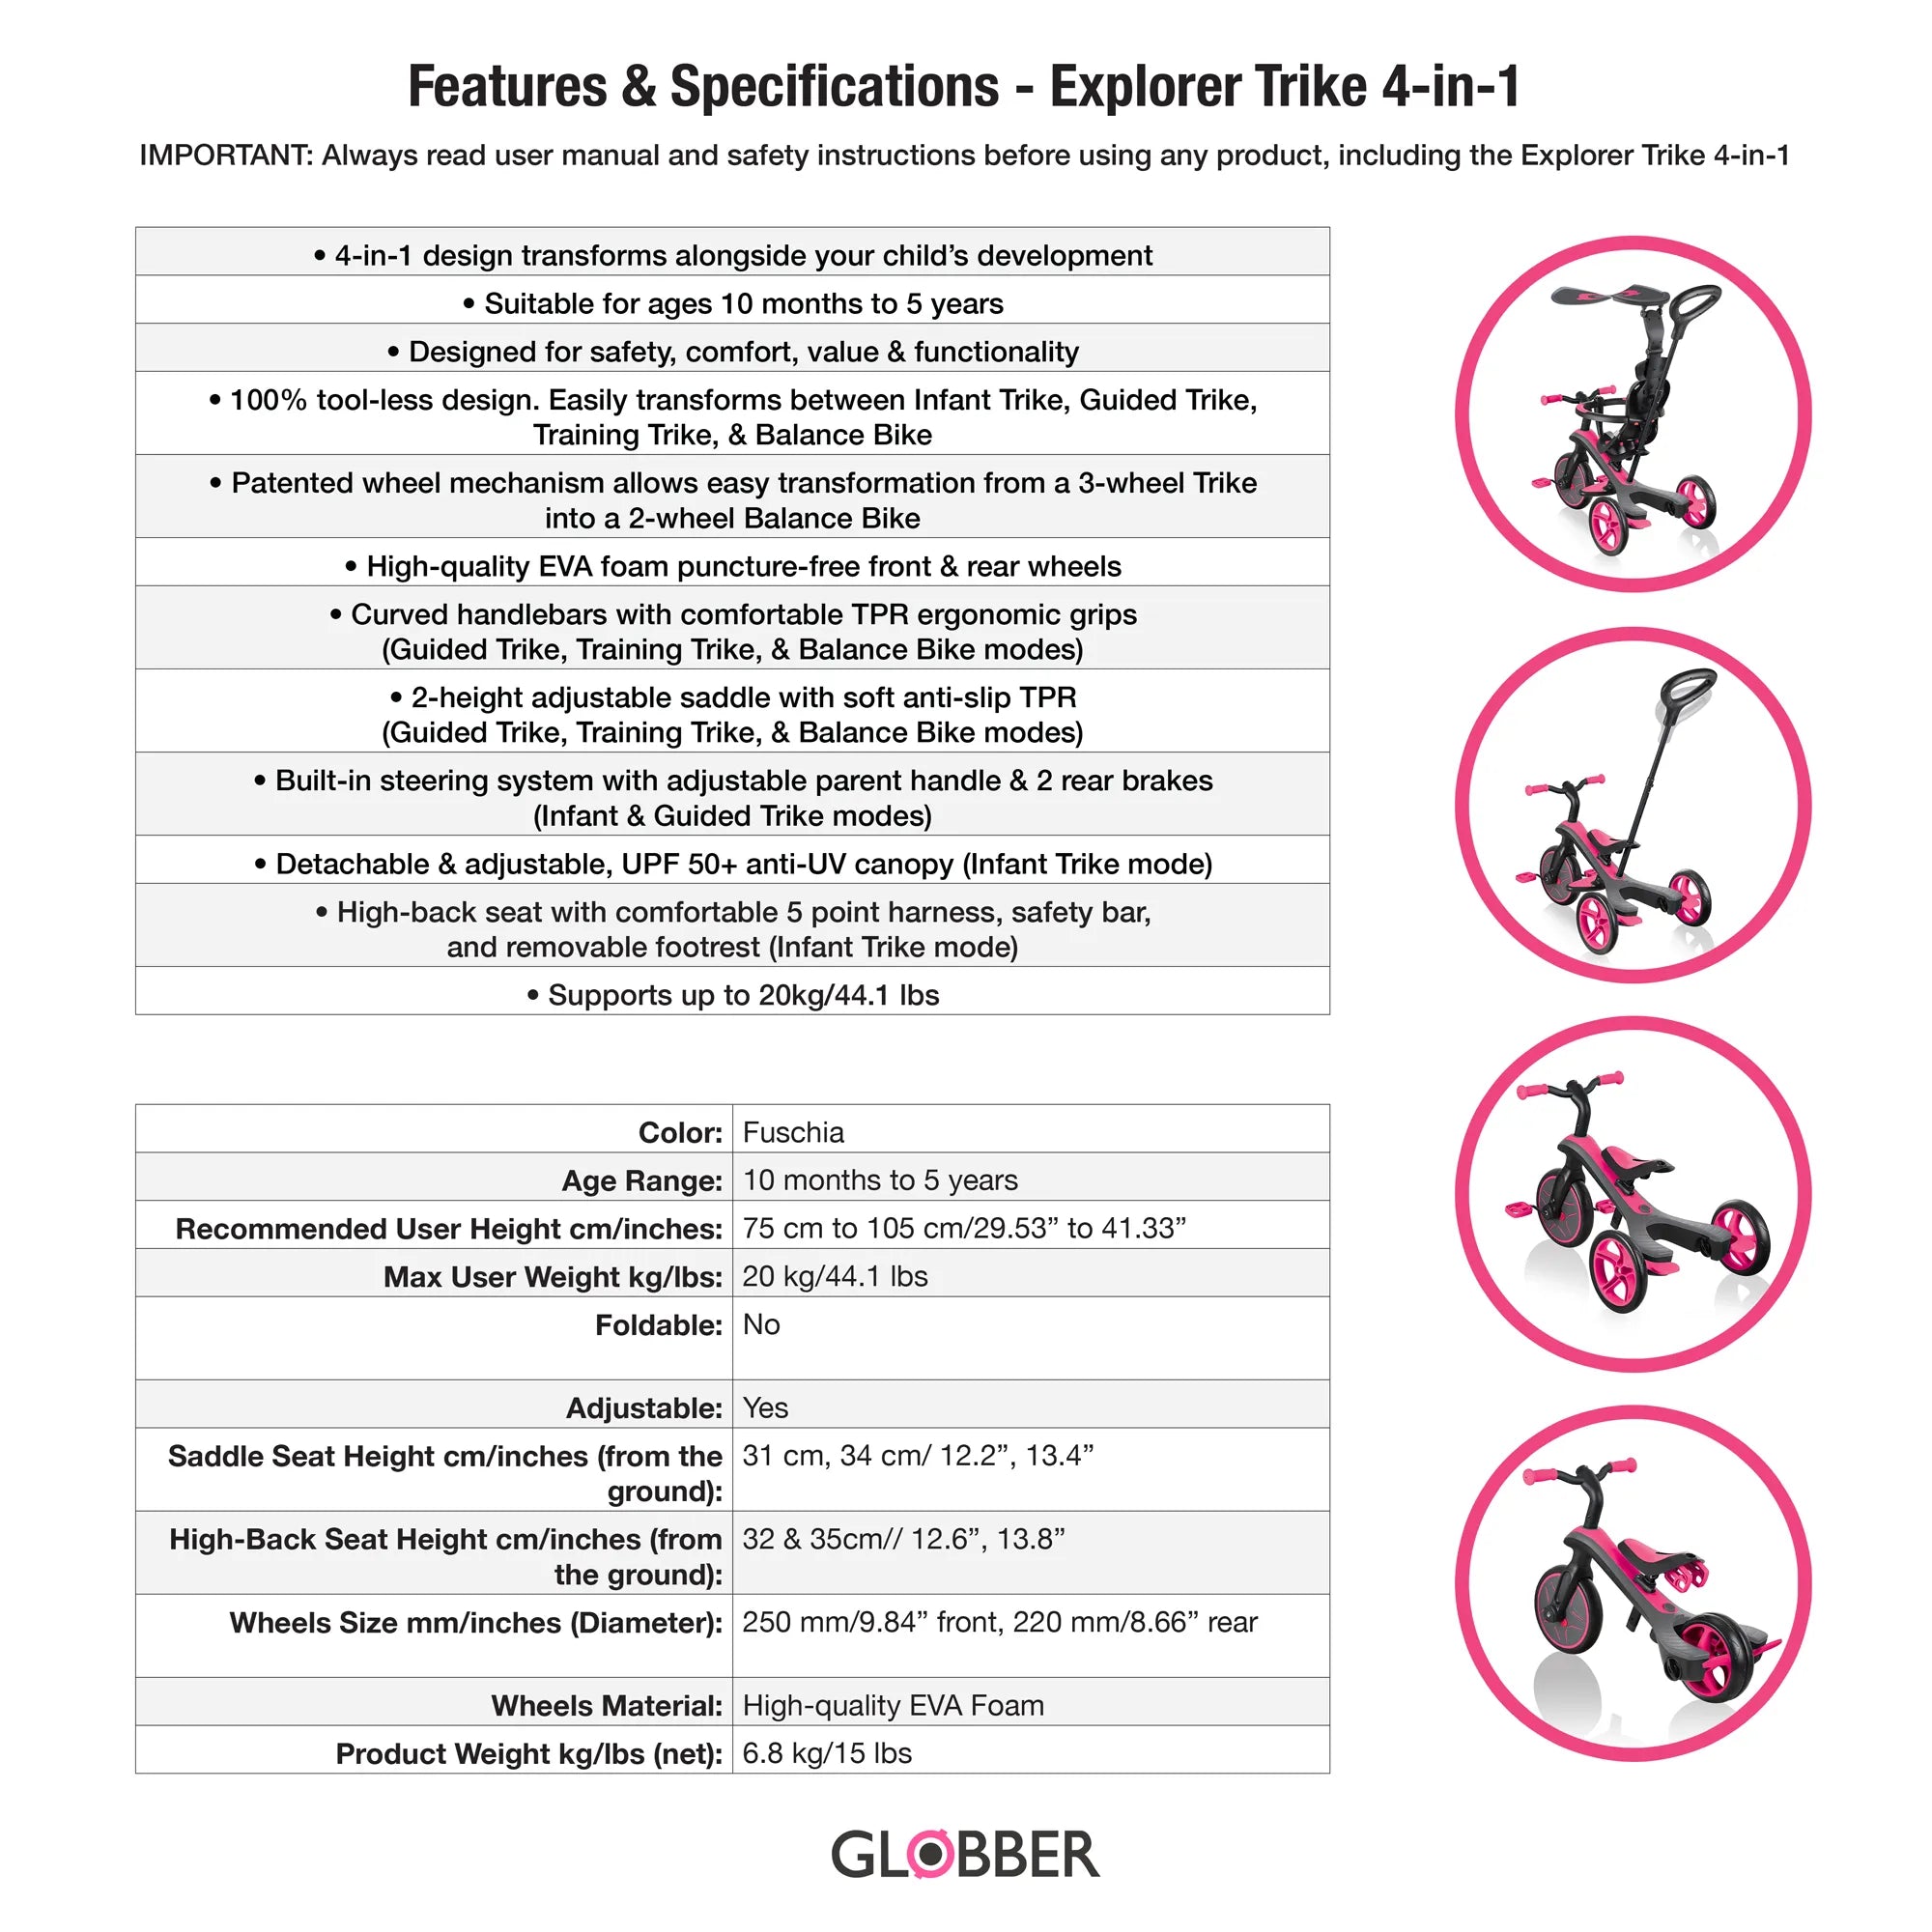 Globber Explorer Trike 4 in 1, Fuschia Pink, Features and Specifications Chart, Browns Hobby & Game.